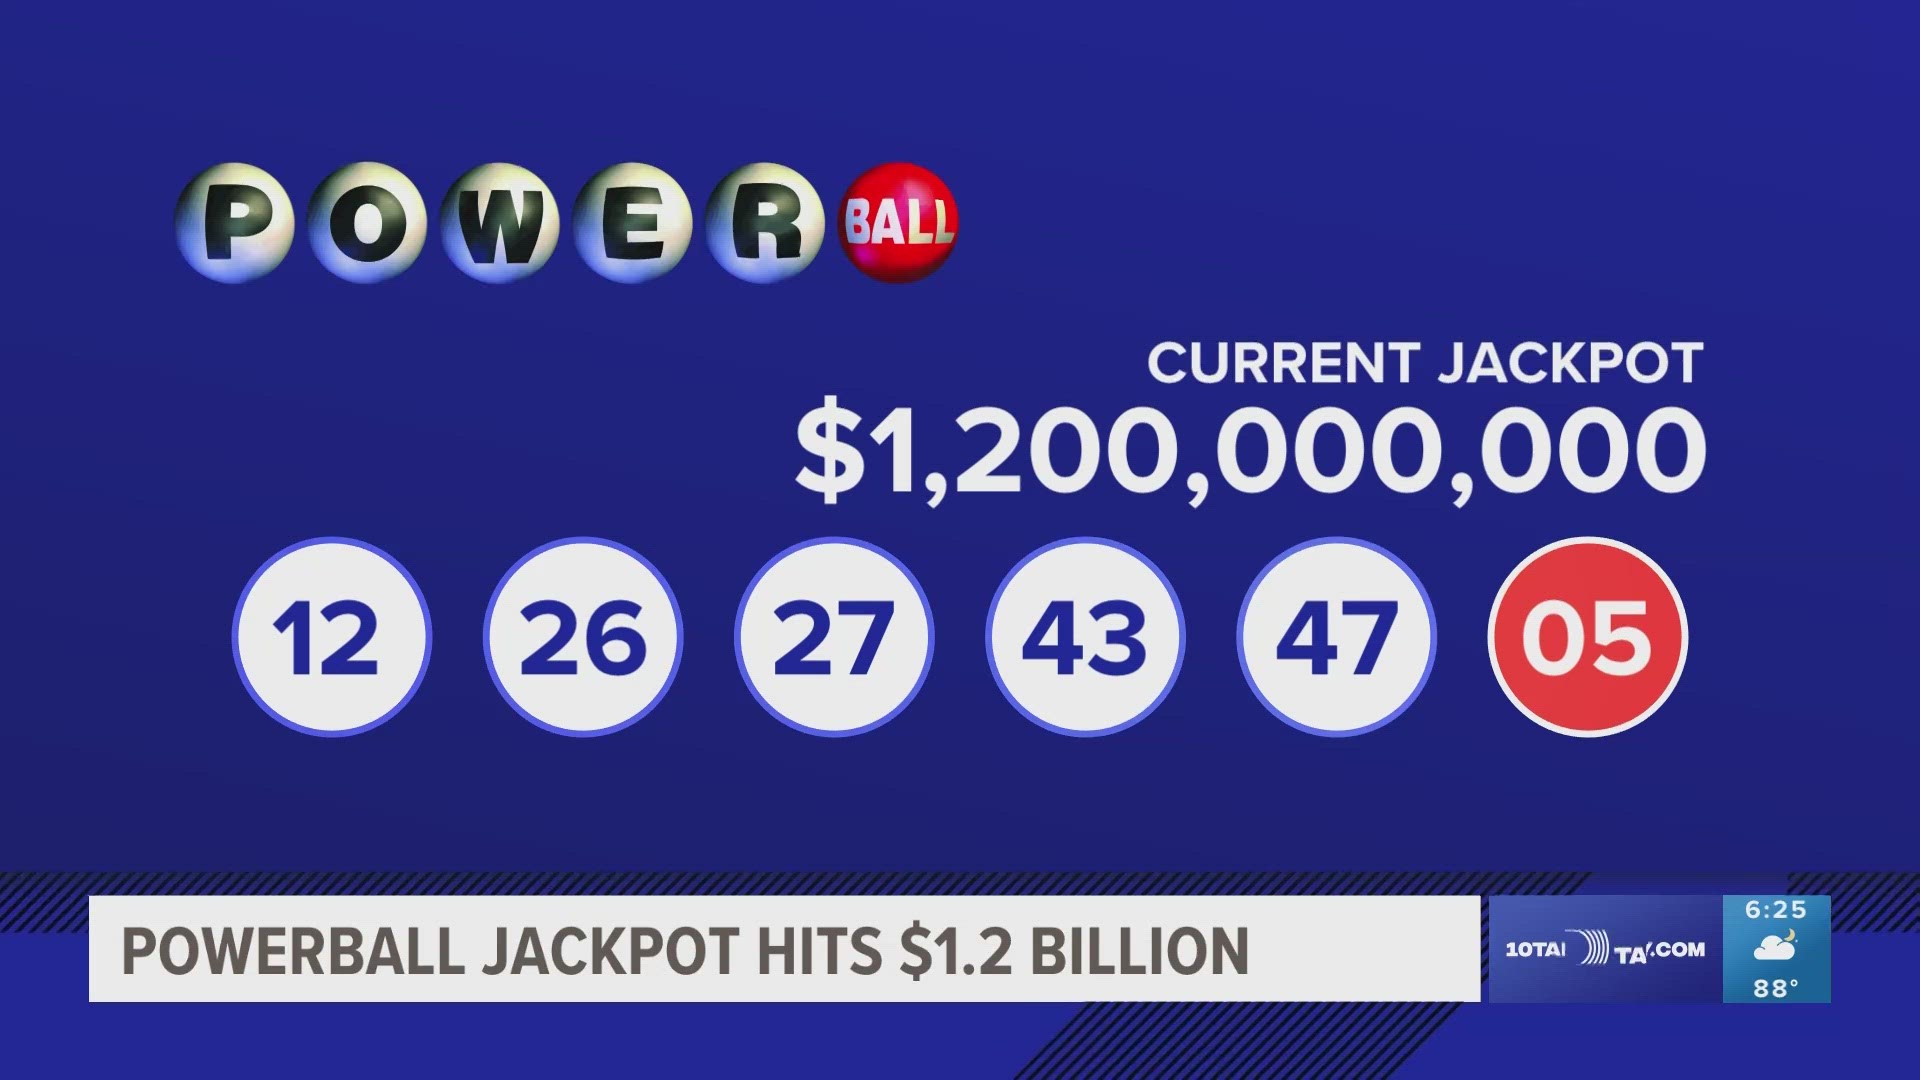 The Powerball jackpot for the next drawing will be among the largest lottery prizes of all time.